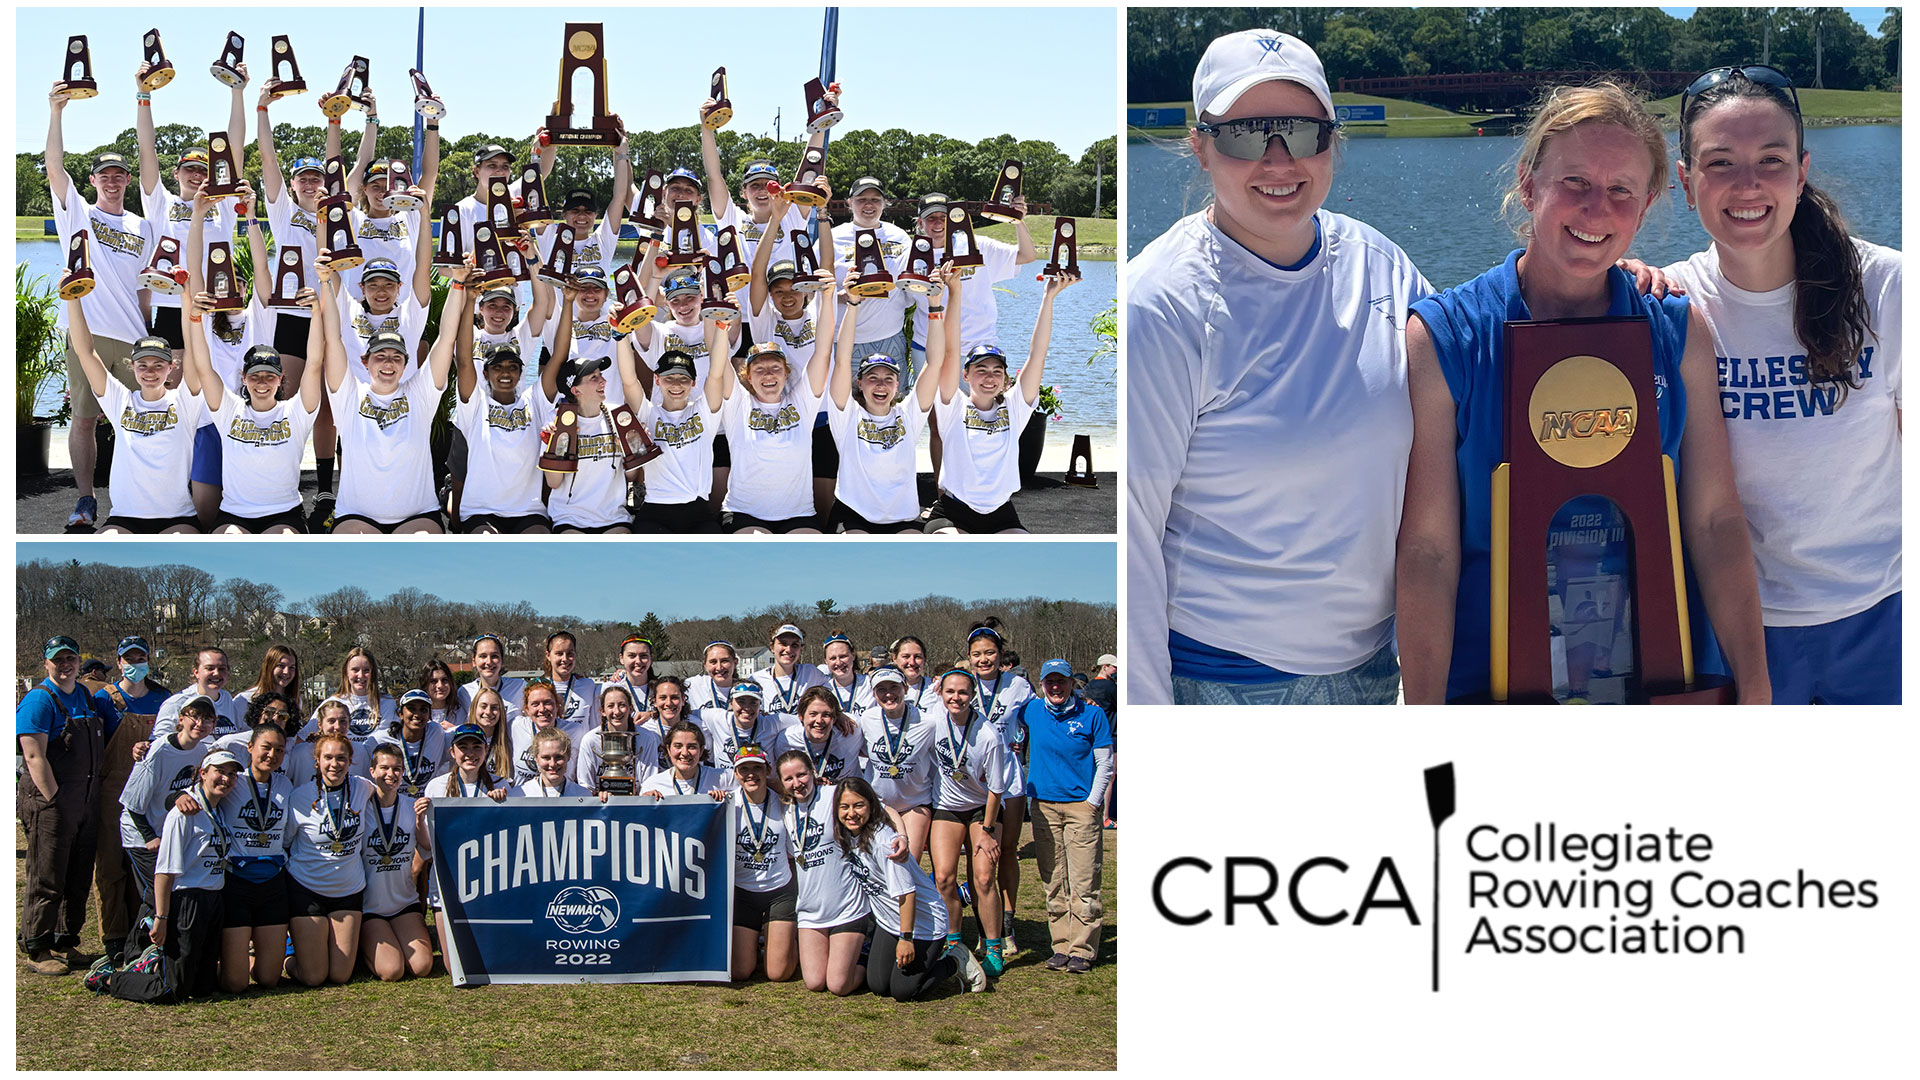 Tessa Spillane and the Blue Crew coaching staff earned National Coaching Staff of the Year honors from the CRCA (Mike Janes (top), Katie Morrison (bottom))